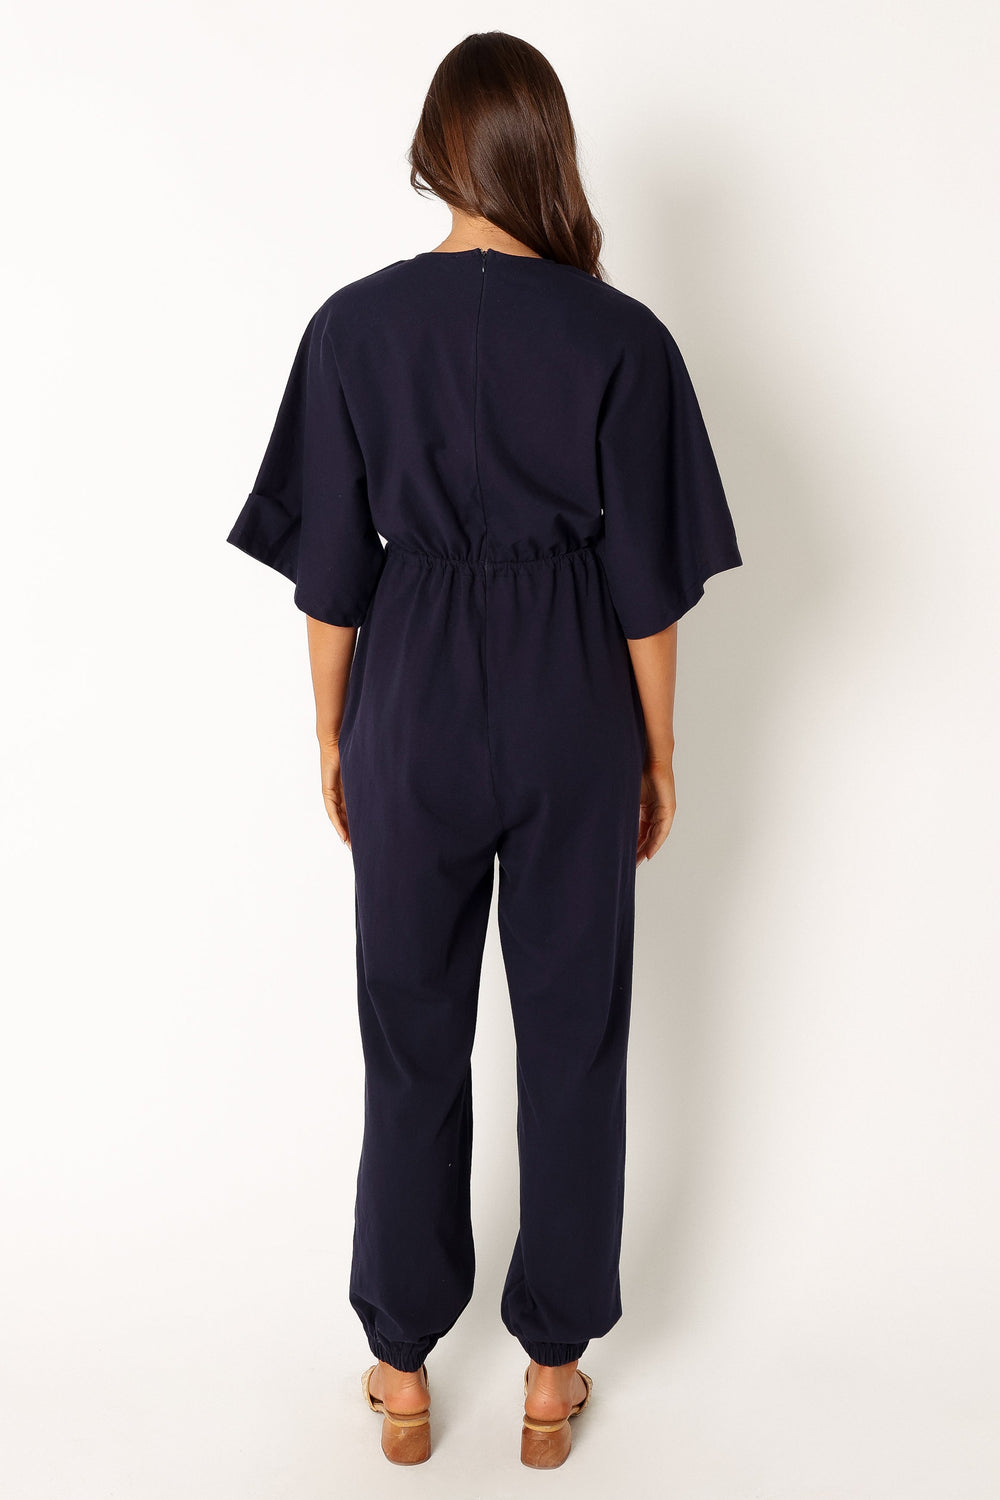 Petal and Pup USA Rompers Whitman Jumpsuit - Navy